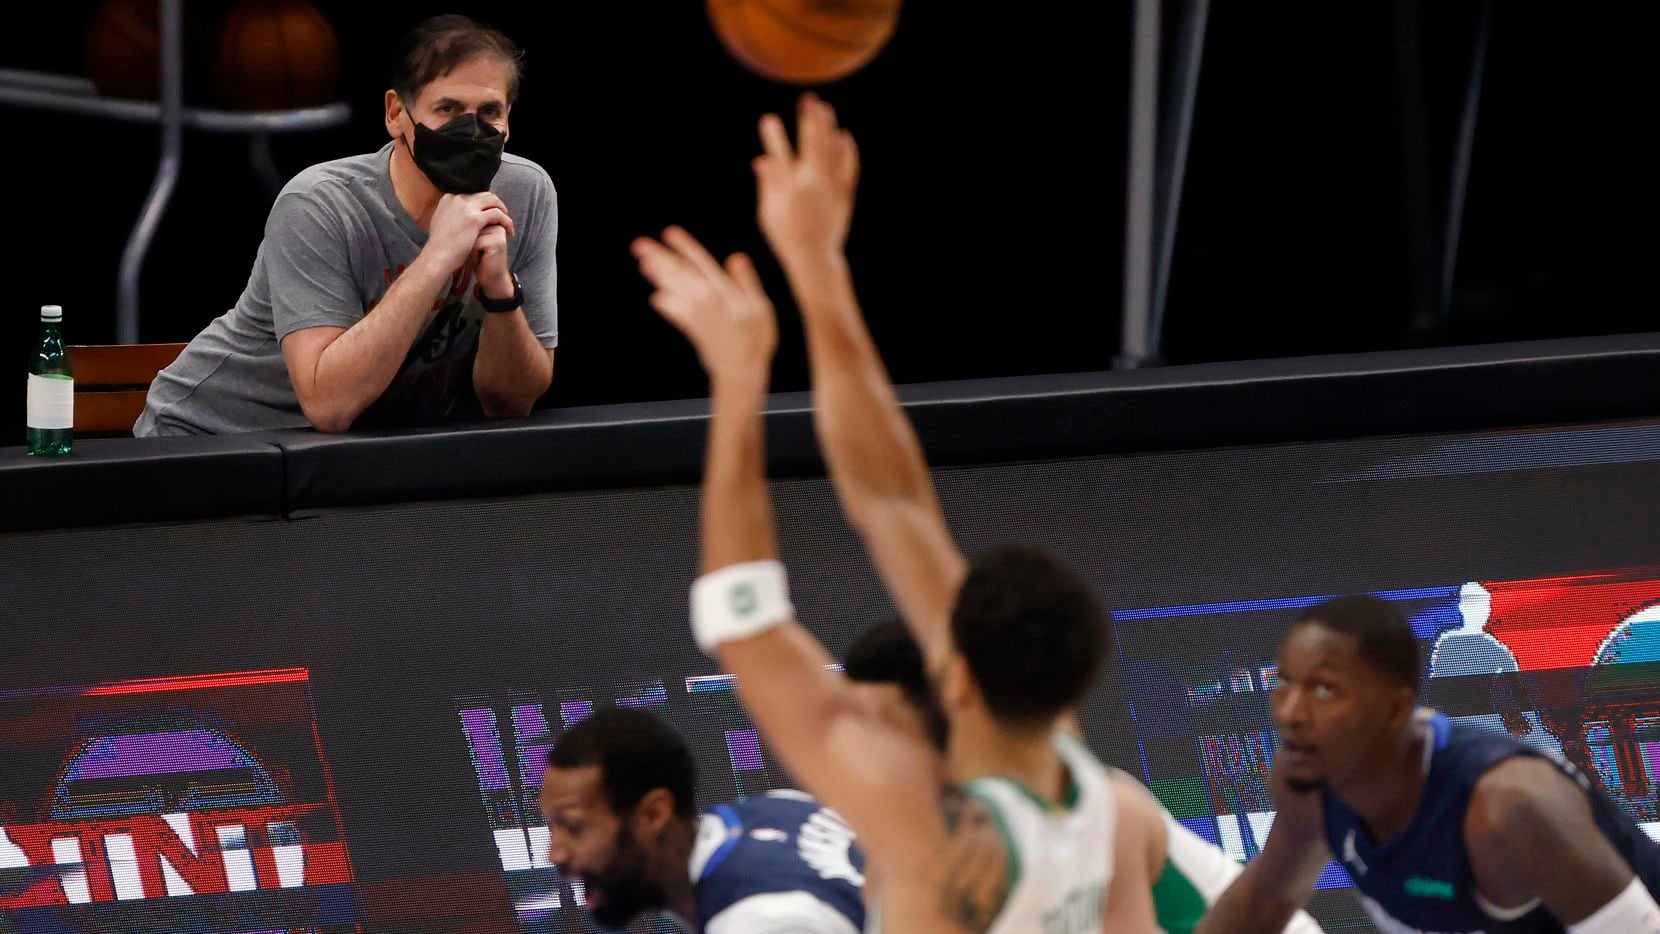 Mavericks owner Mark Cuban watches his team play against the Celtics during the first half of play at American Airlines Center in Dallas on Tuesday, Feb. 23, 2021.